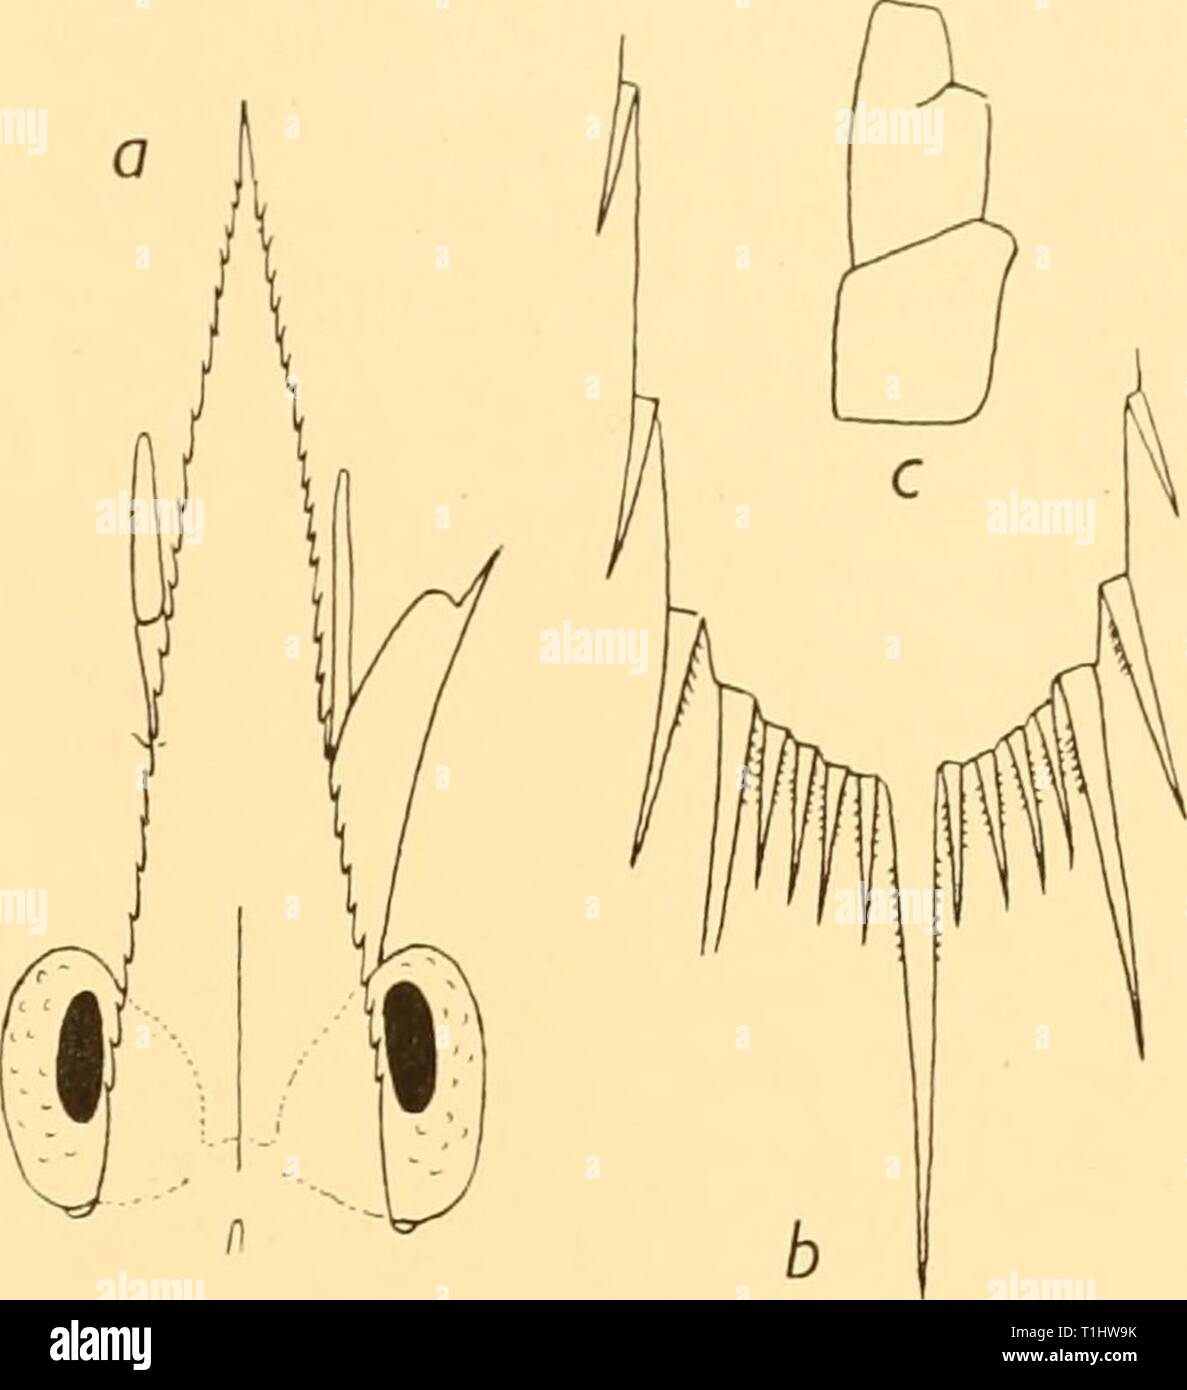 Discovery reports (1938) Discovery reports  discoveryreports17inst Year: 1938  LARVAE OF DECAPOD CRUSTACEA 313 Leg I not fully developed. Leg 5 with long exopod. Epipods present on legs 1-4. Four pairs of pleopods.    Fig. 12. Thalassinid D. V. St. 711. a. Rostrum. h. Telson. c. Palp of maxillule. d. Endopod of maxillipede i. Thalassinid D. VI (Fig. 13) Discovery Sts. 1574, 1576. Rostrum 2-45 mm.; body 6-45 mm. Rostrum rather narrow, tapering, with slender smooth apical part. Carapace with ten small marginal spines. Abdomen: somite 2 with large dorsal spine, somites 3-5 Stock Photo